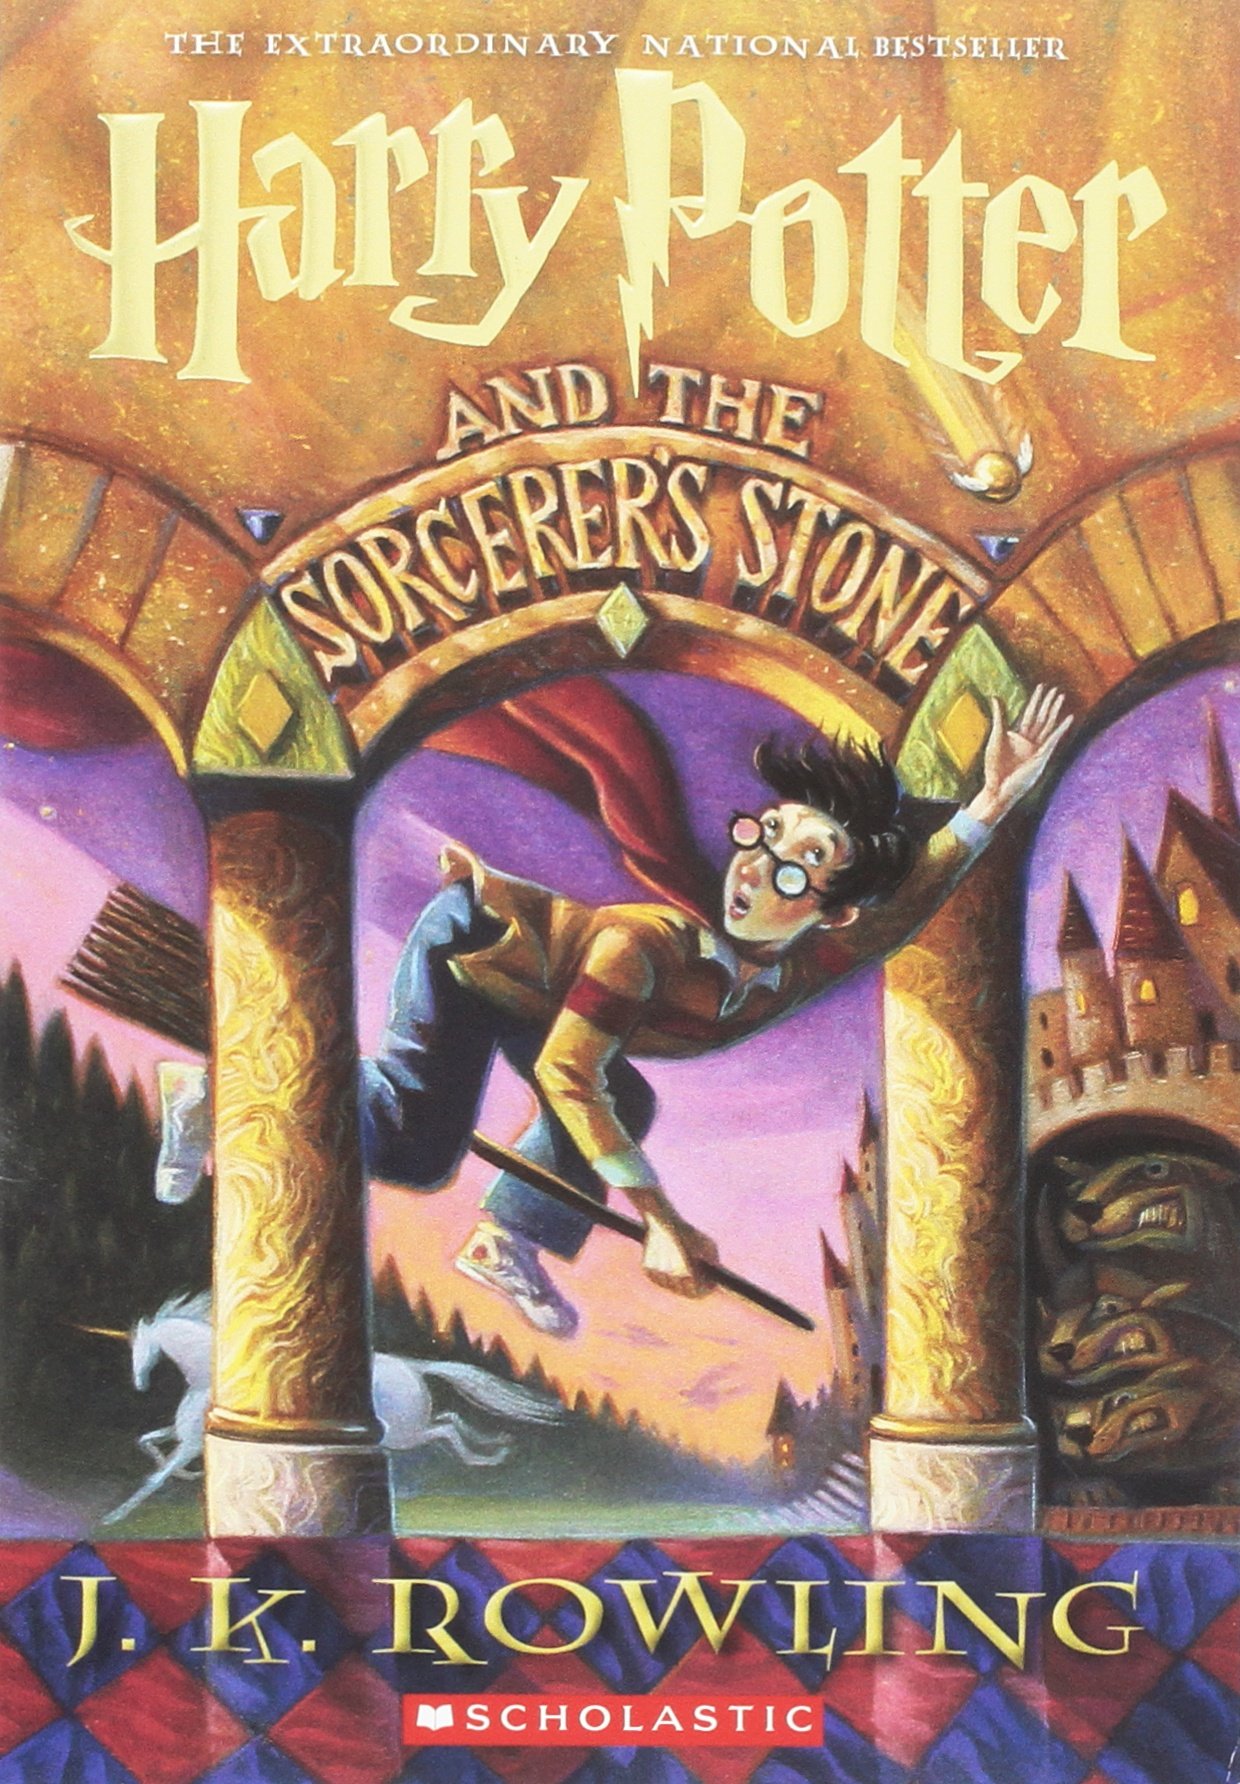 The boy wizard himself appears on Mary GrandPré's cover to Harry Potter and the Philosopher's Stone (1997), Scholastic.